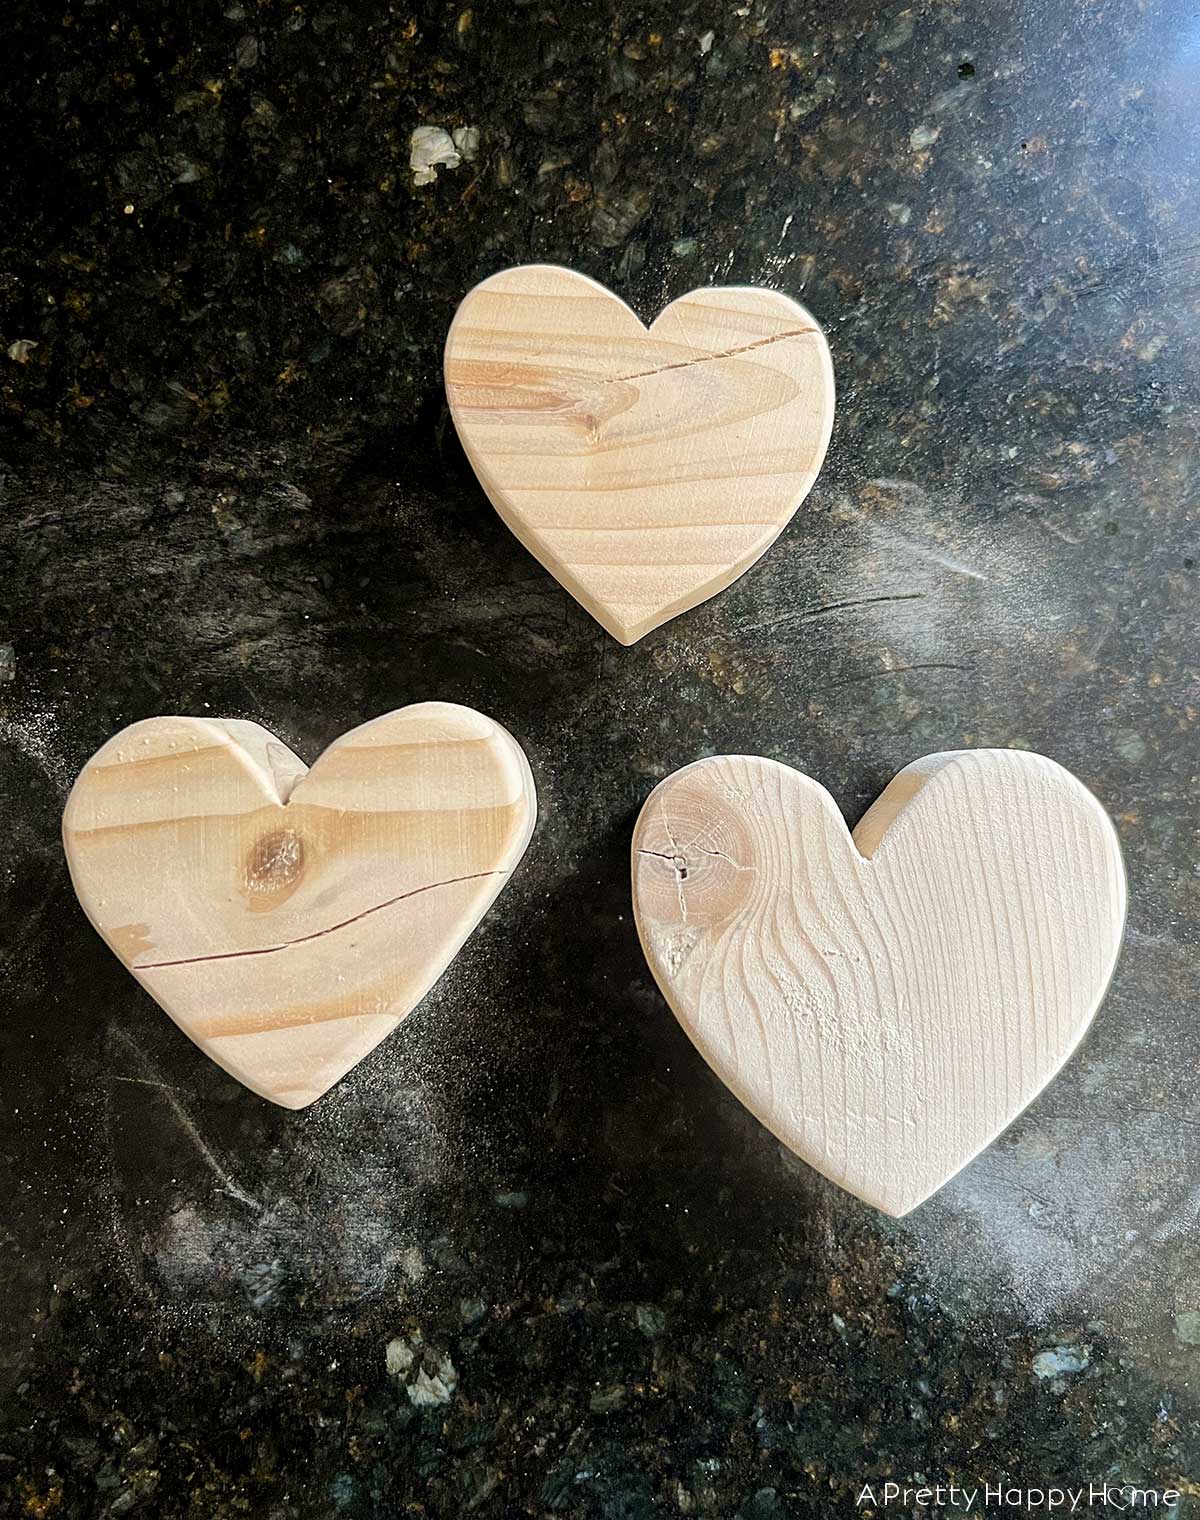 2x4 wood hearts for valentine's day rustic wood hearts wood heart craft